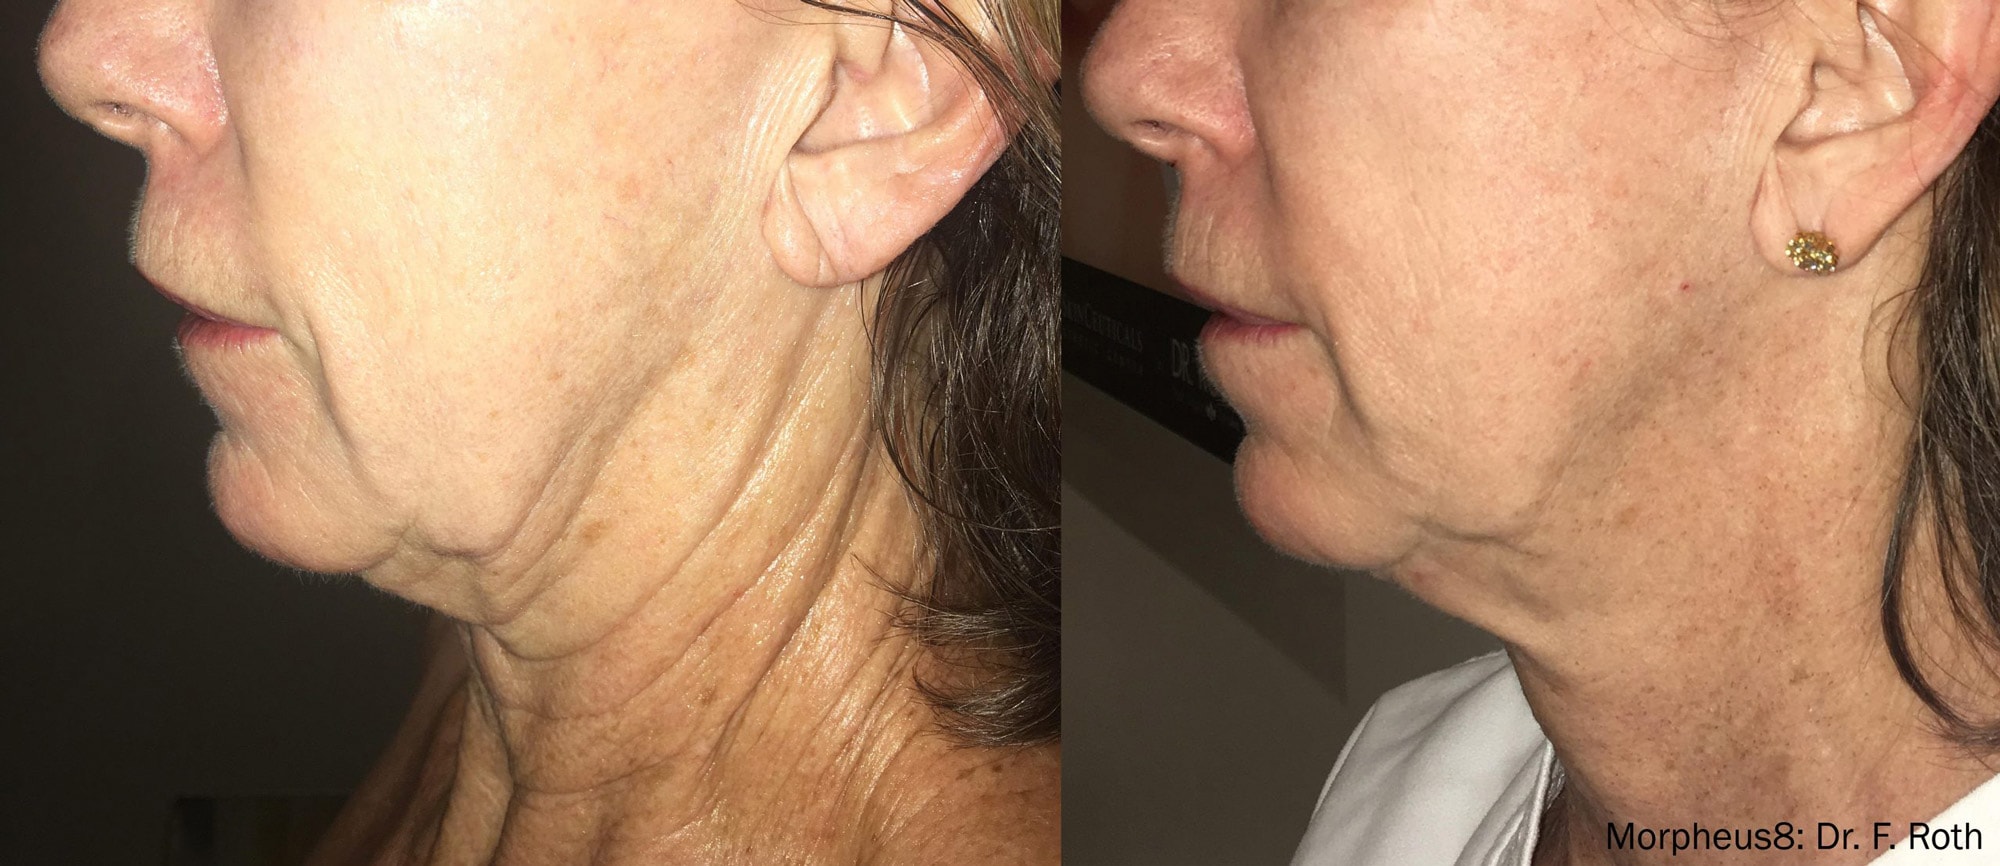 Before and After photos of Morpheus8 treatments tightening deep wrinkles and loose skin on a woman’s neck